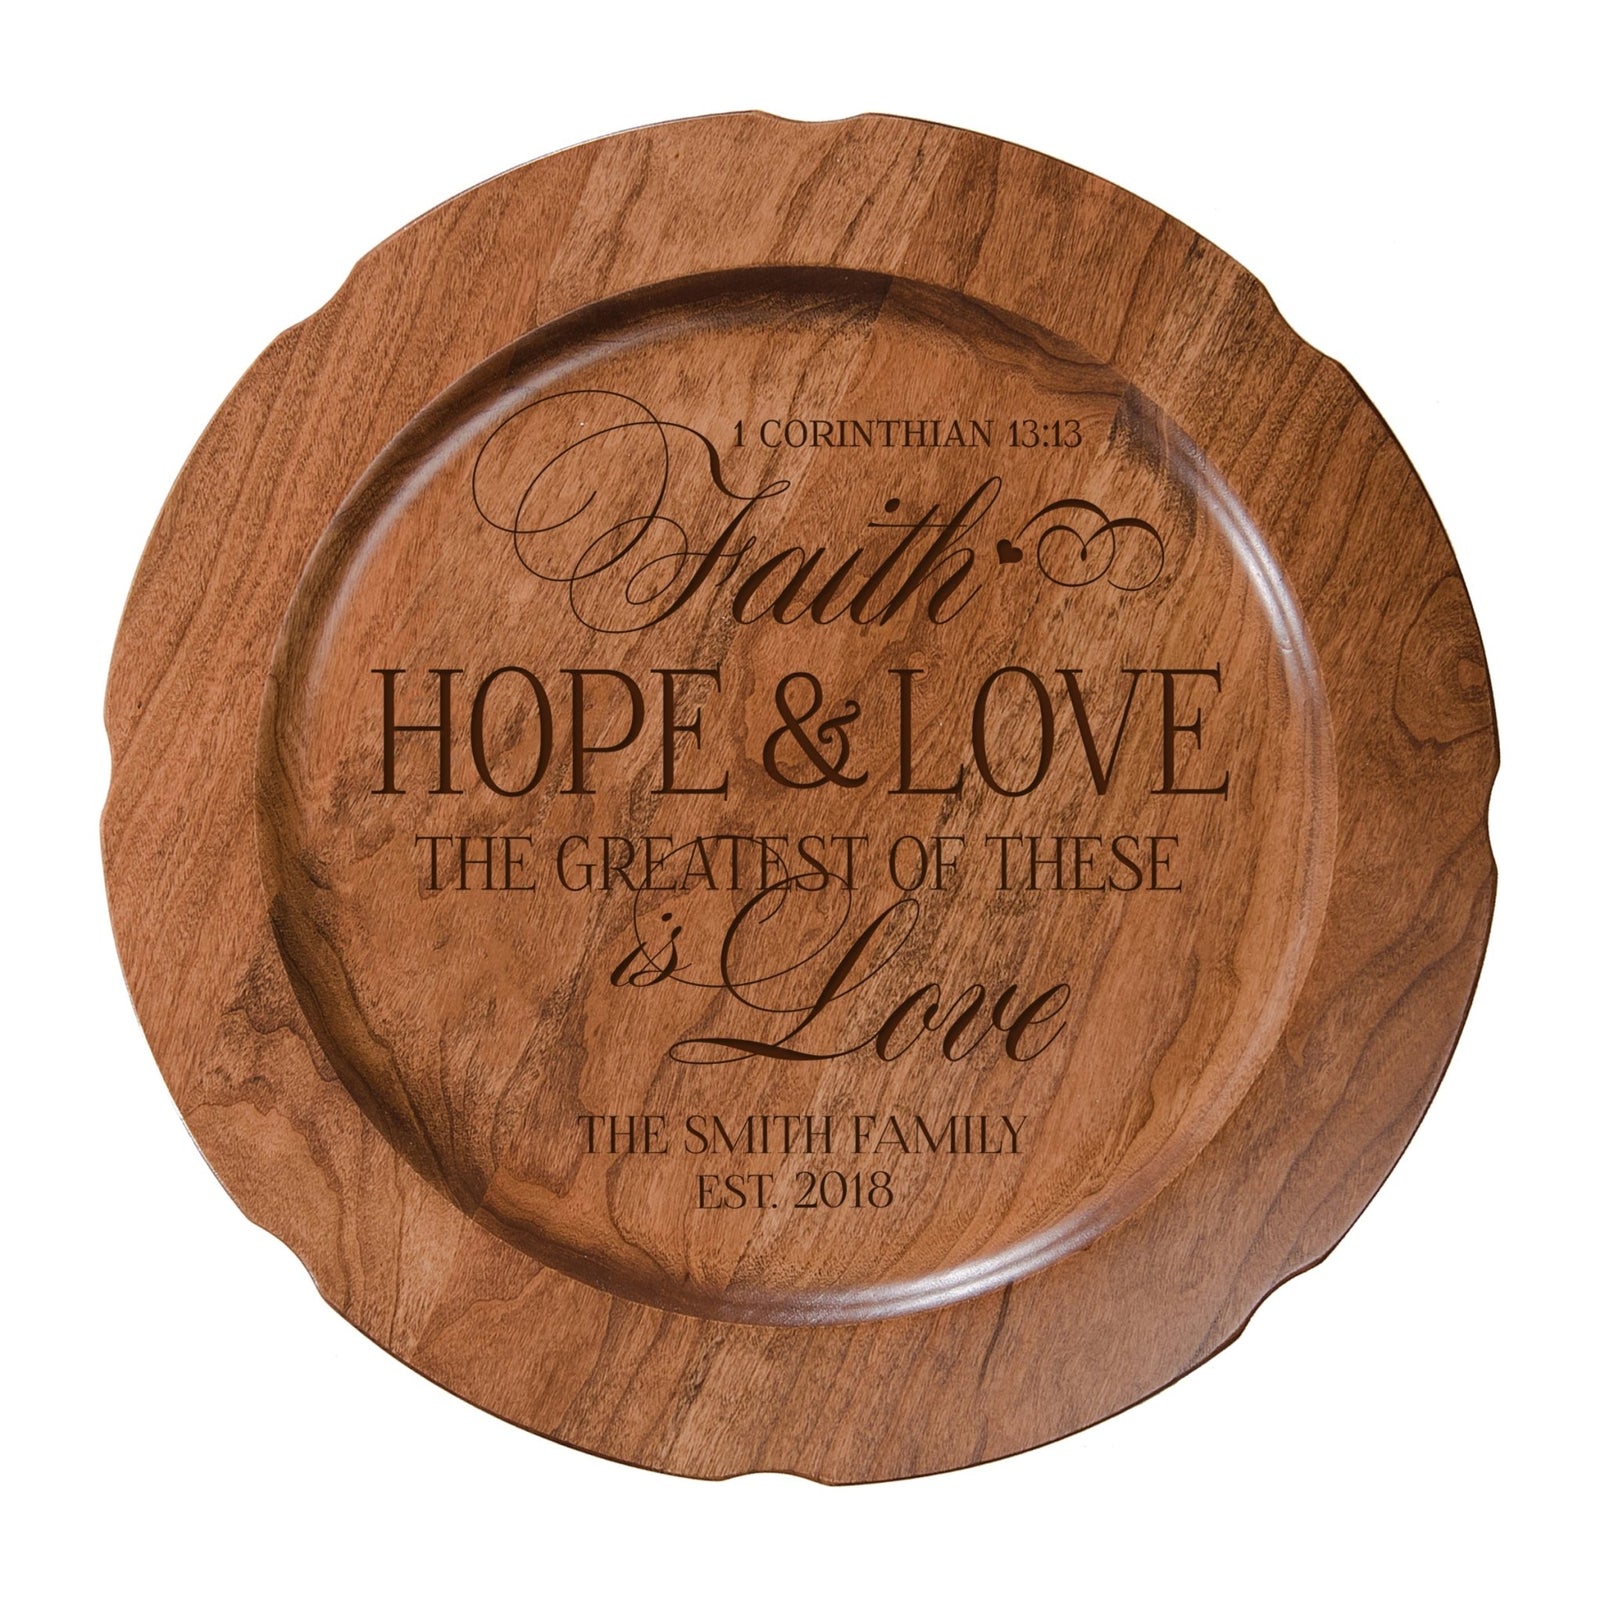 Personalized Inspirational Plates With Quotes - Hope & Love - LifeSong Milestones